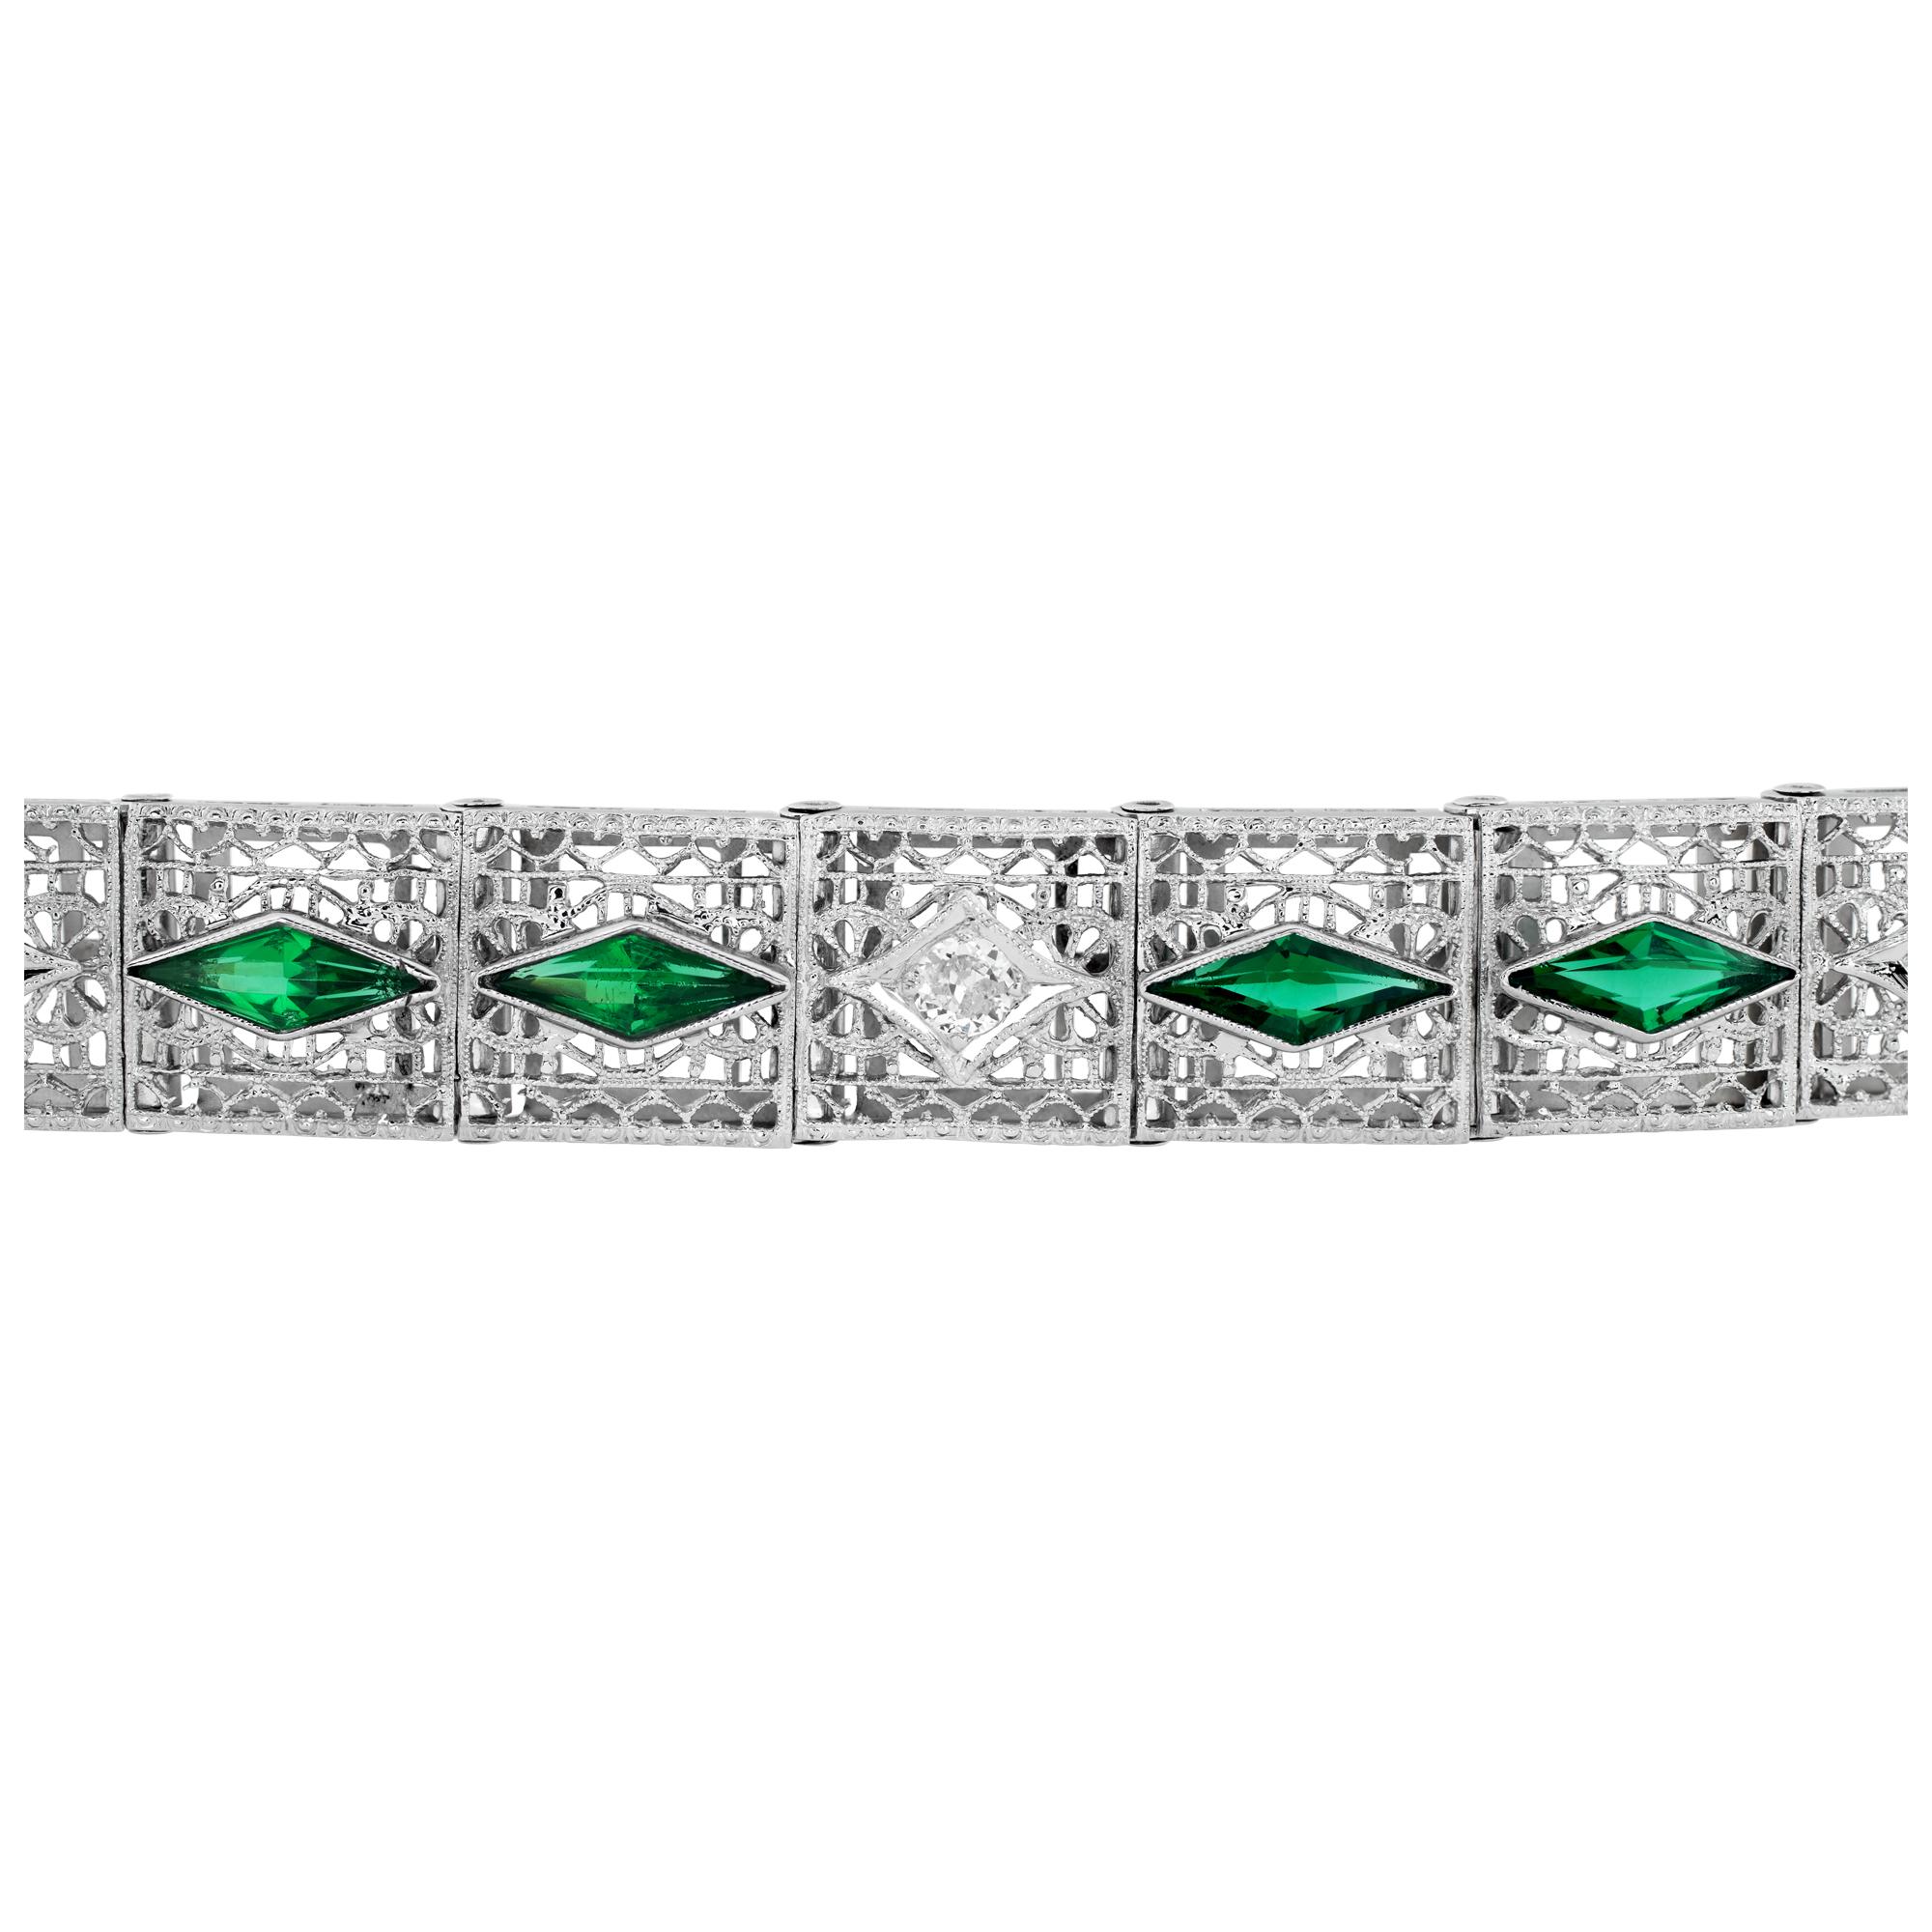 Elegant  line bracelet with synthetic emeralds and diamonds set in filigree 14k white gold, with platinum top. All diamonds are eye clean and whie. 7.75